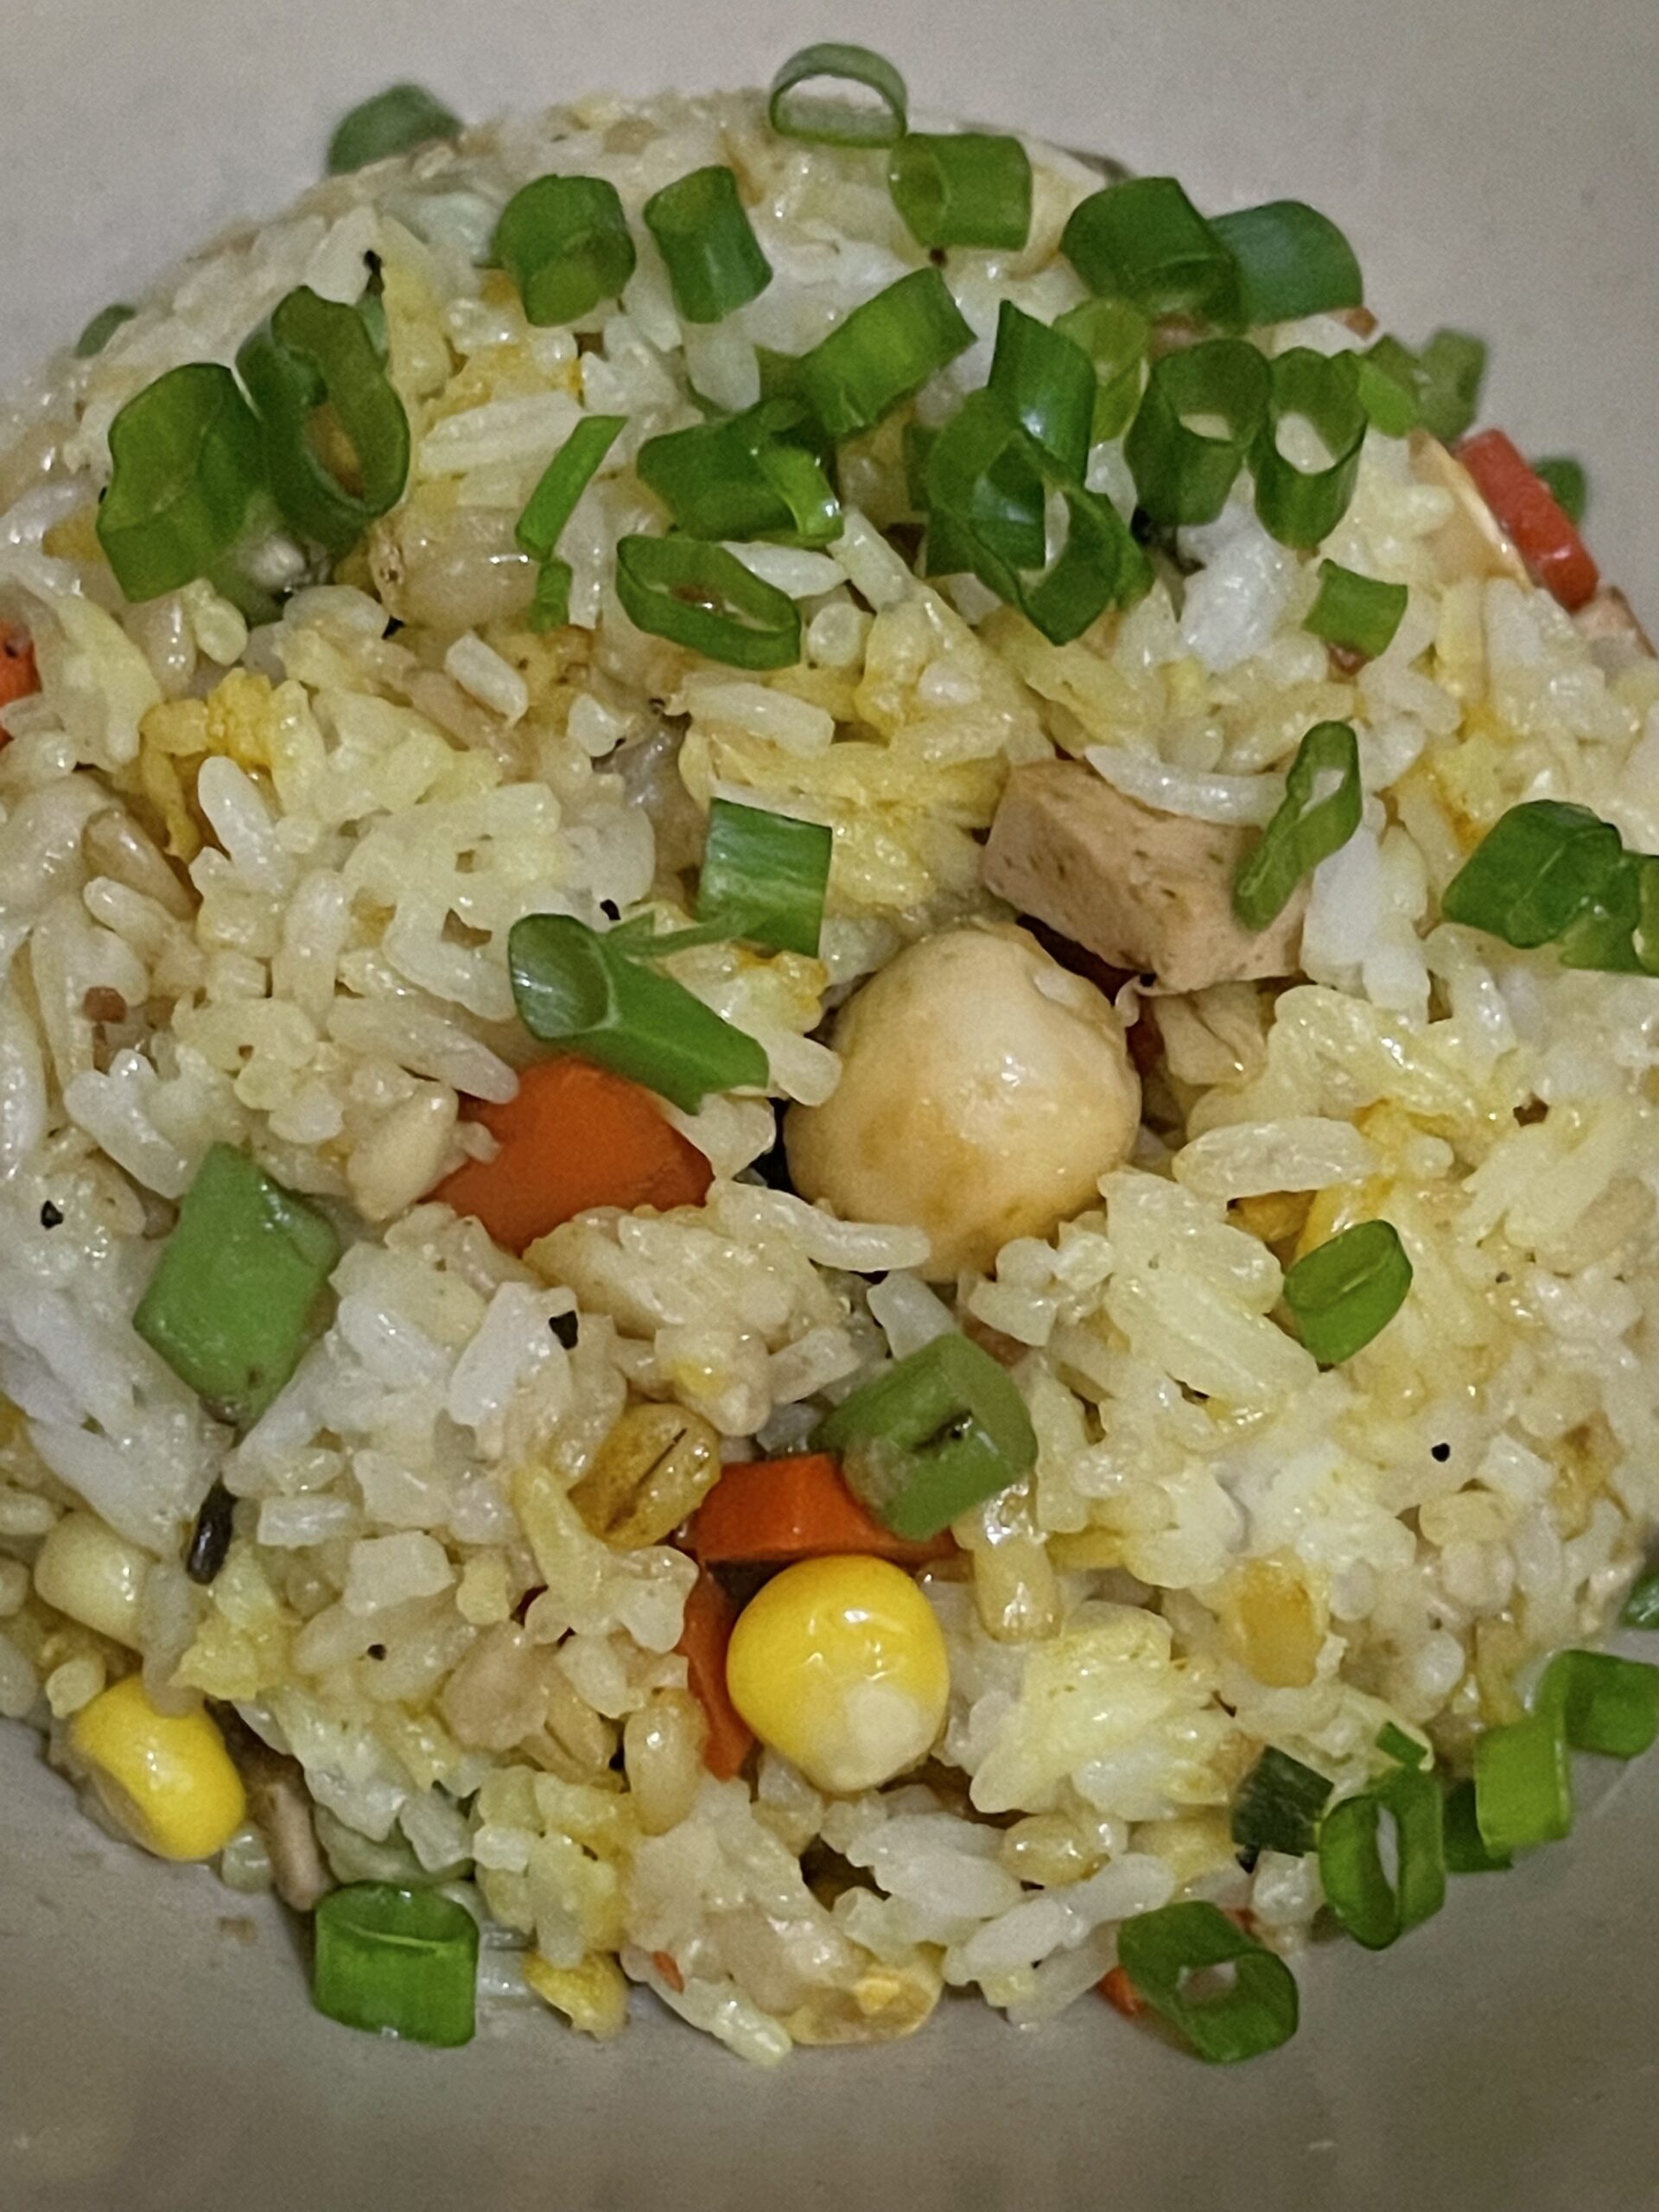 lotus seed fried rice garnished with chopped green onions on a plate.